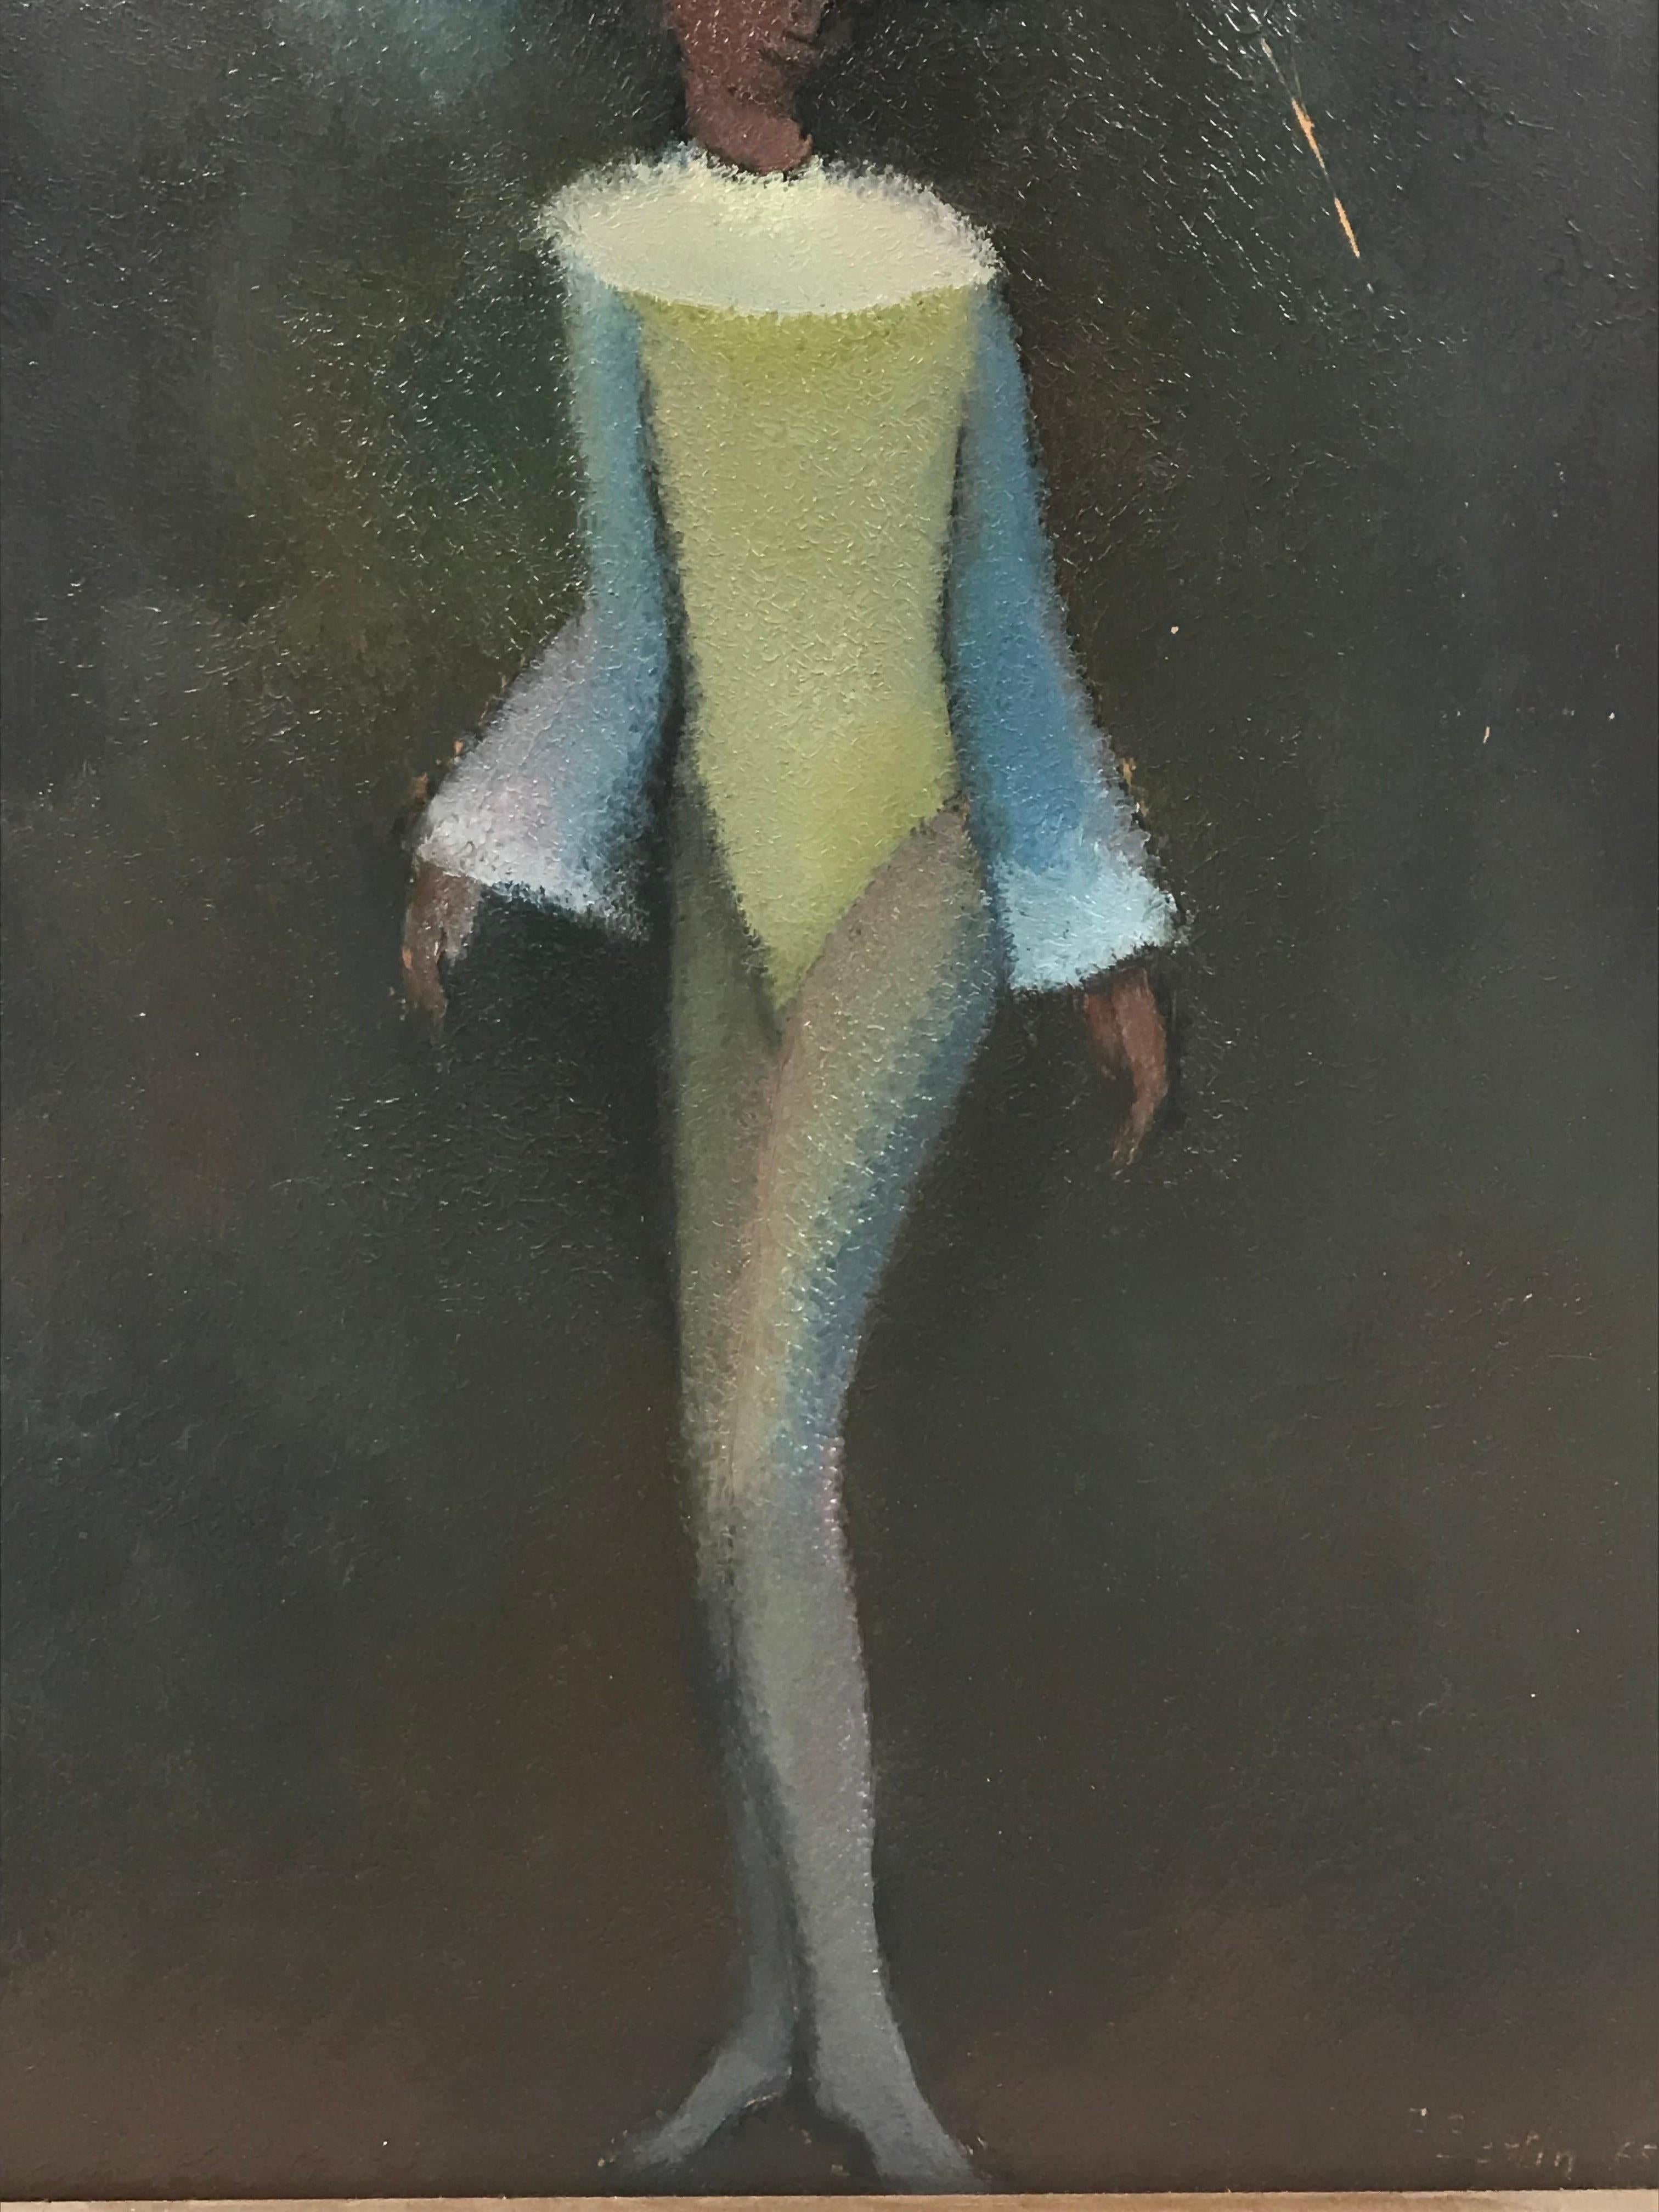 Artist/ School: A. Bertin, French 1965, signed and inscribed verso

Title: Figure in Blue

Medium: oil painting on board, framed 

Size:
framed: 18.5 x 12.5inches
painting: 18 x 11.5 inches

Provenance: private collection, France

Condition: The